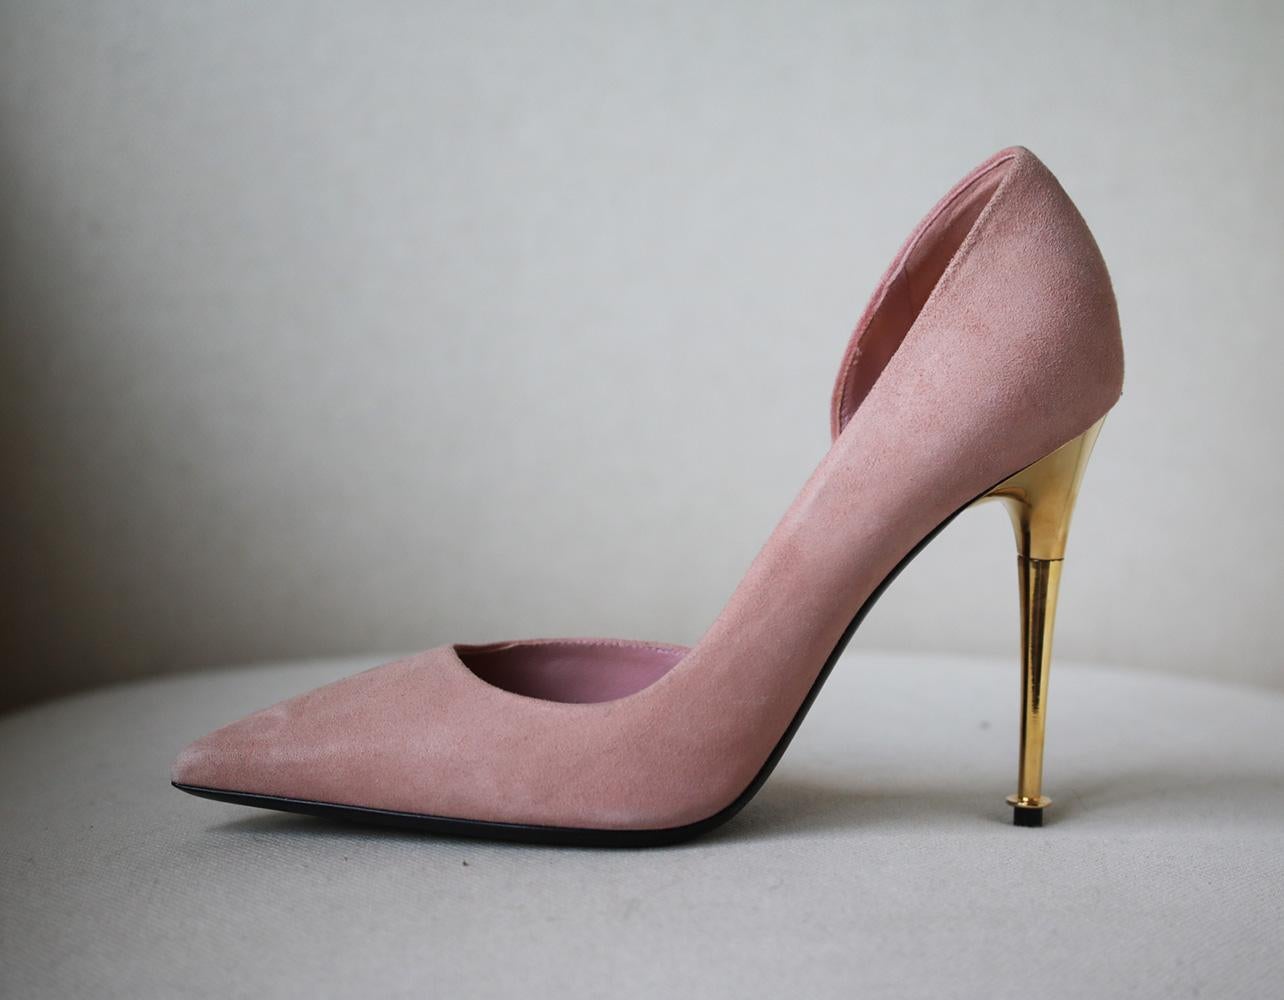 TOM FORD's Italian-made suede pumps have a flattering d'Orsay-style cutout and sleek pointed toe. The versatile nude shade is complemented perfectly by the brand's signature gold heel. Gold heel measures approximately 101 mm/ 4 inches. Nude-pink